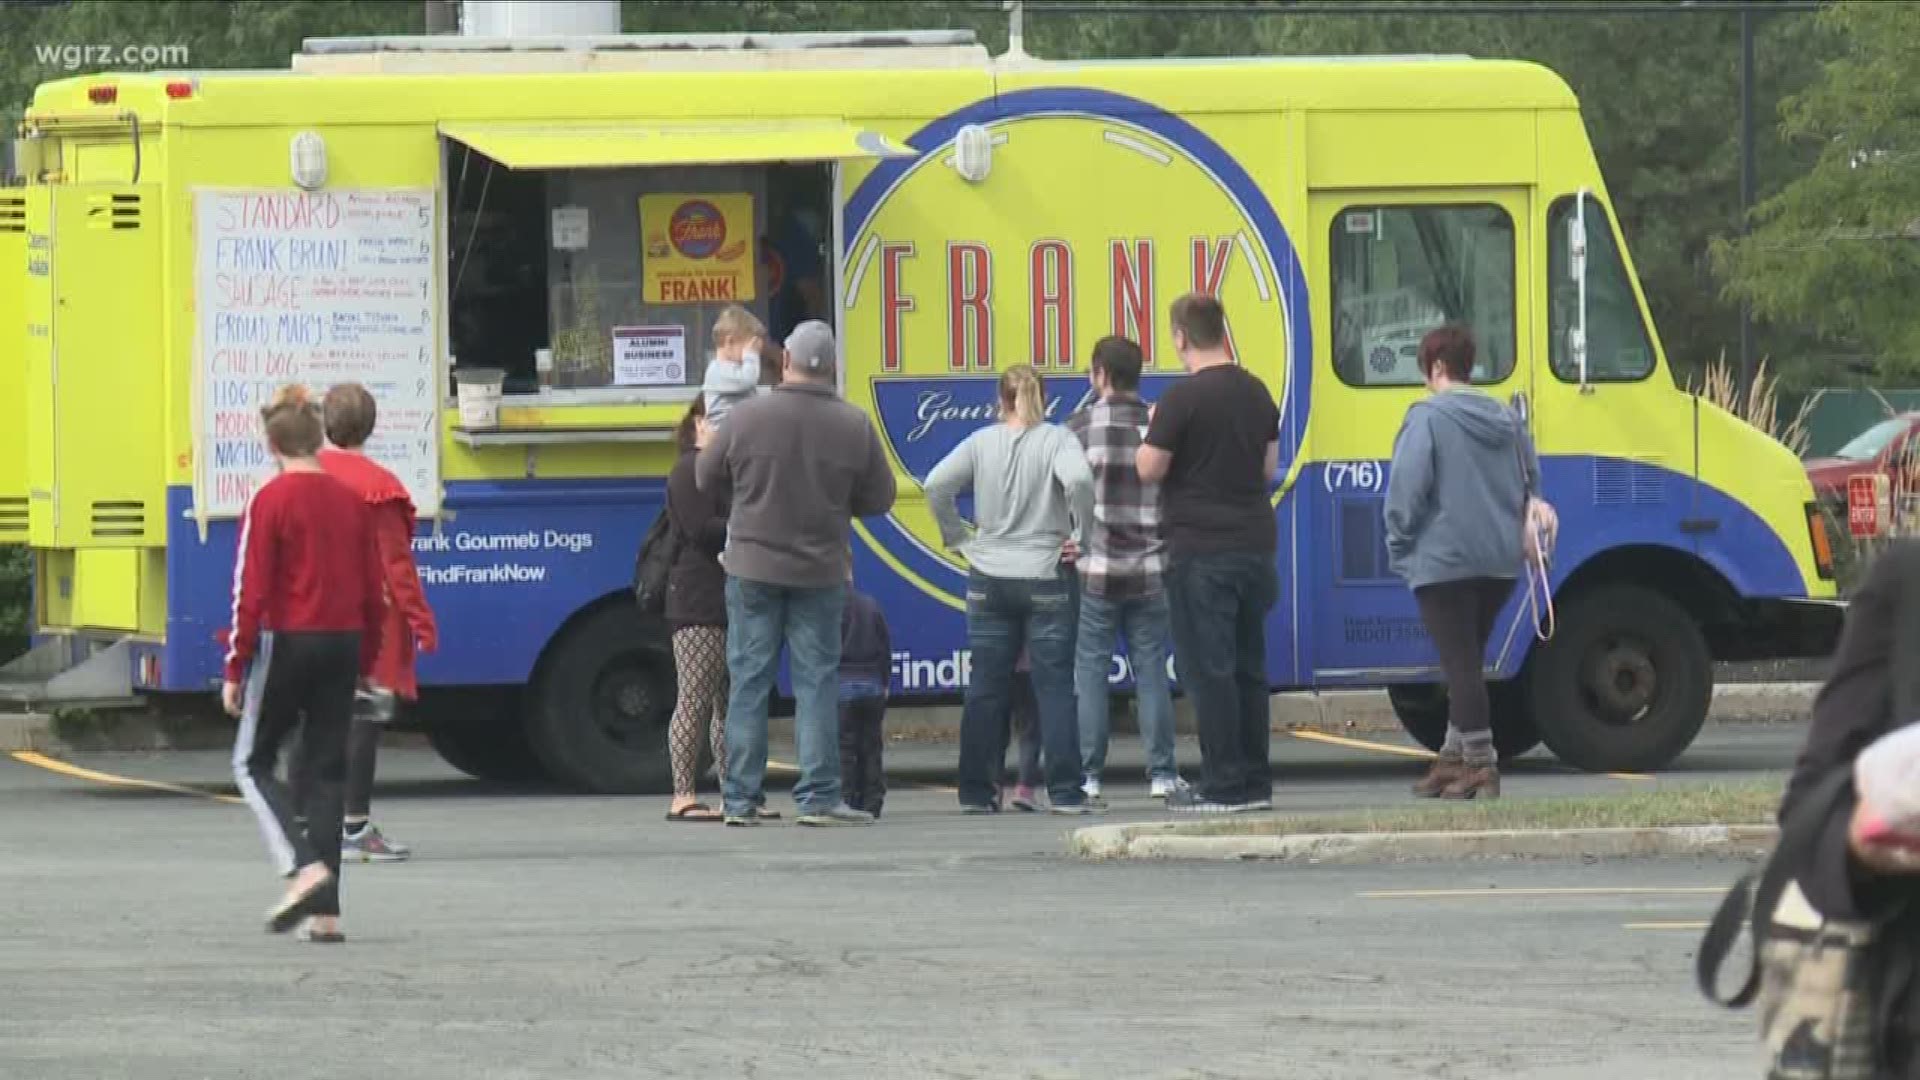 Food truck contest to benefit the Food bank of WNY